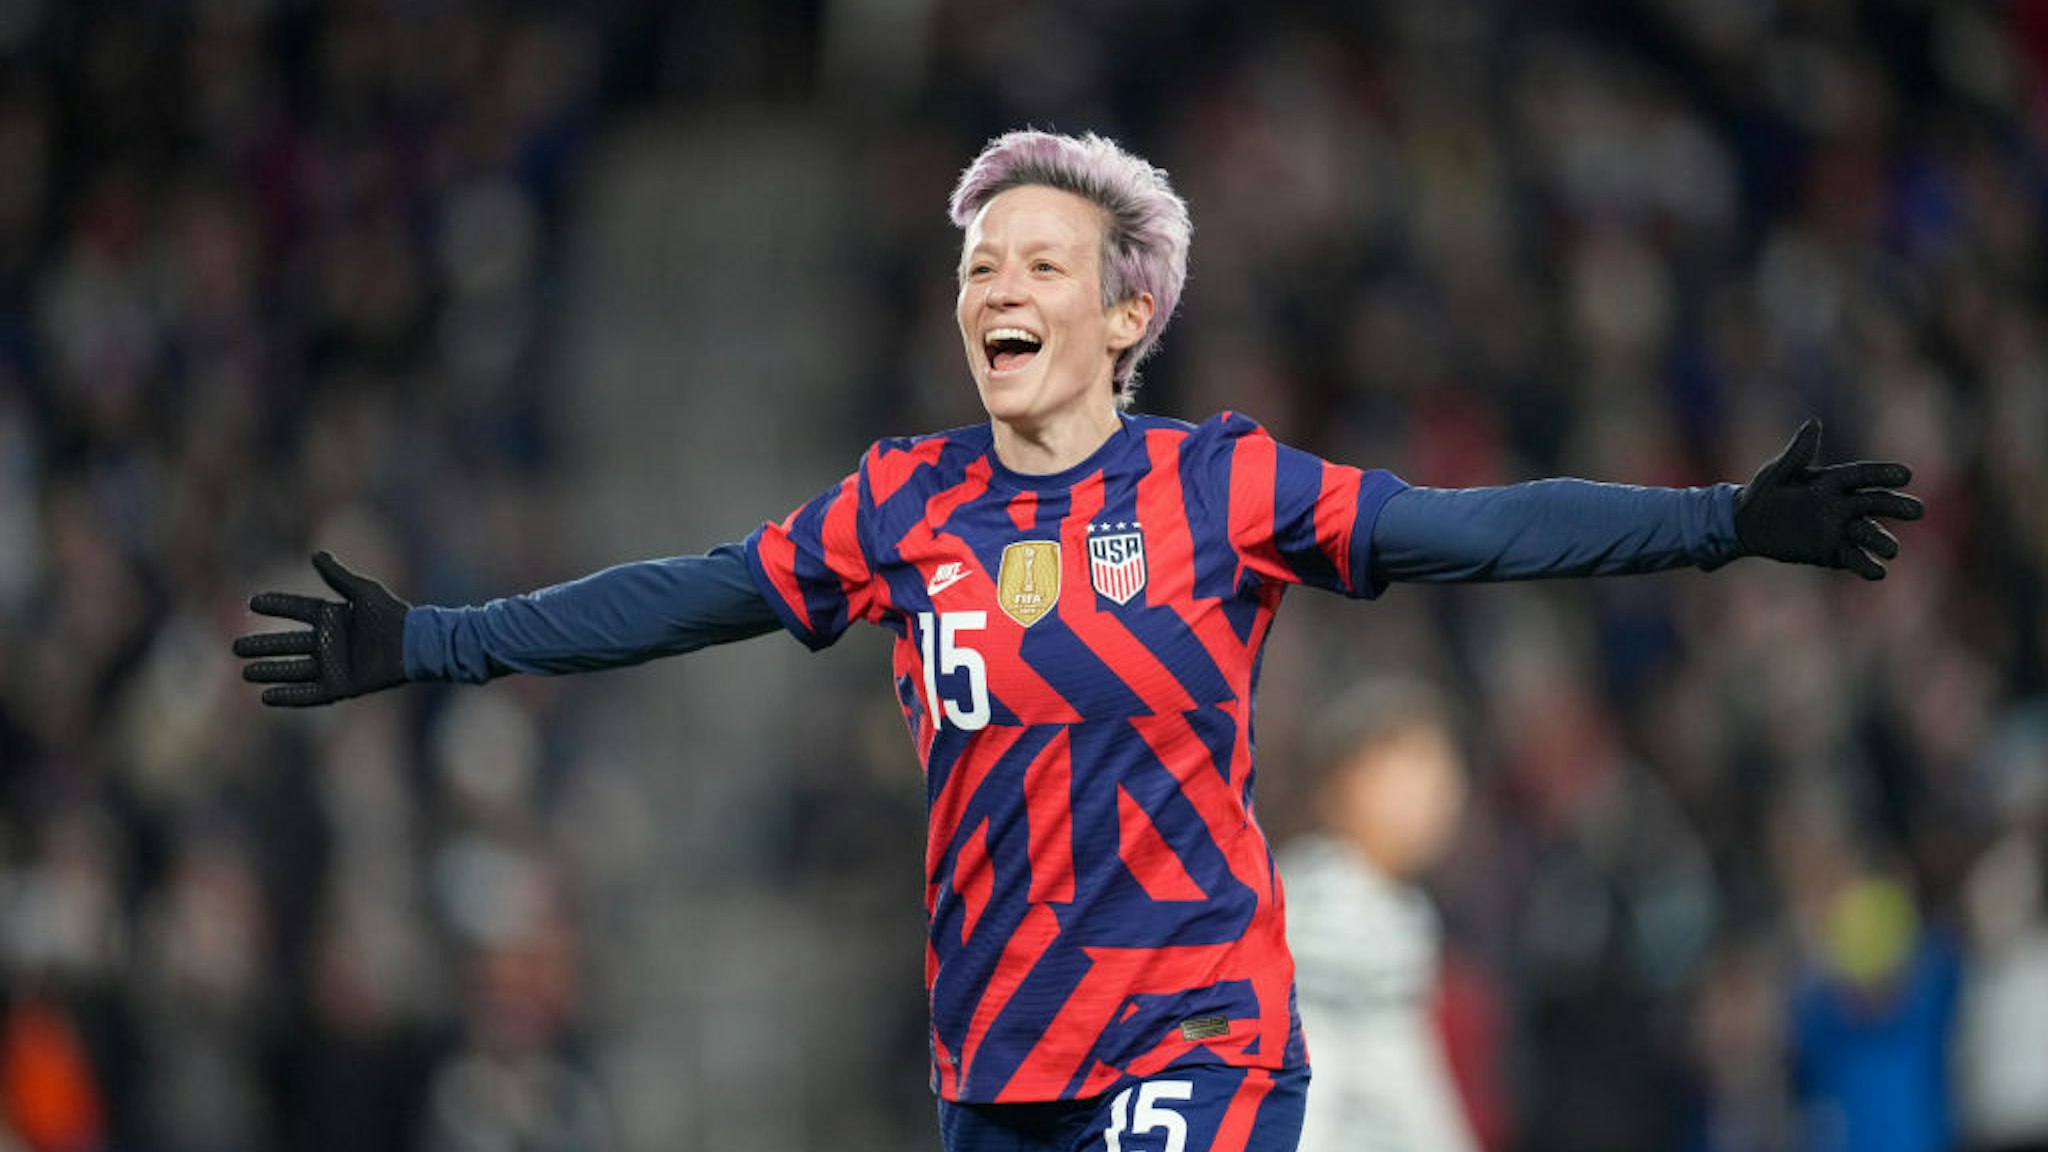 Megan Rapinoe #15 of the United States celebrates after scoring a goal during a game against Korea Republic at Allianz Field on October 26, 2021 in St. Paul, Minnesota.